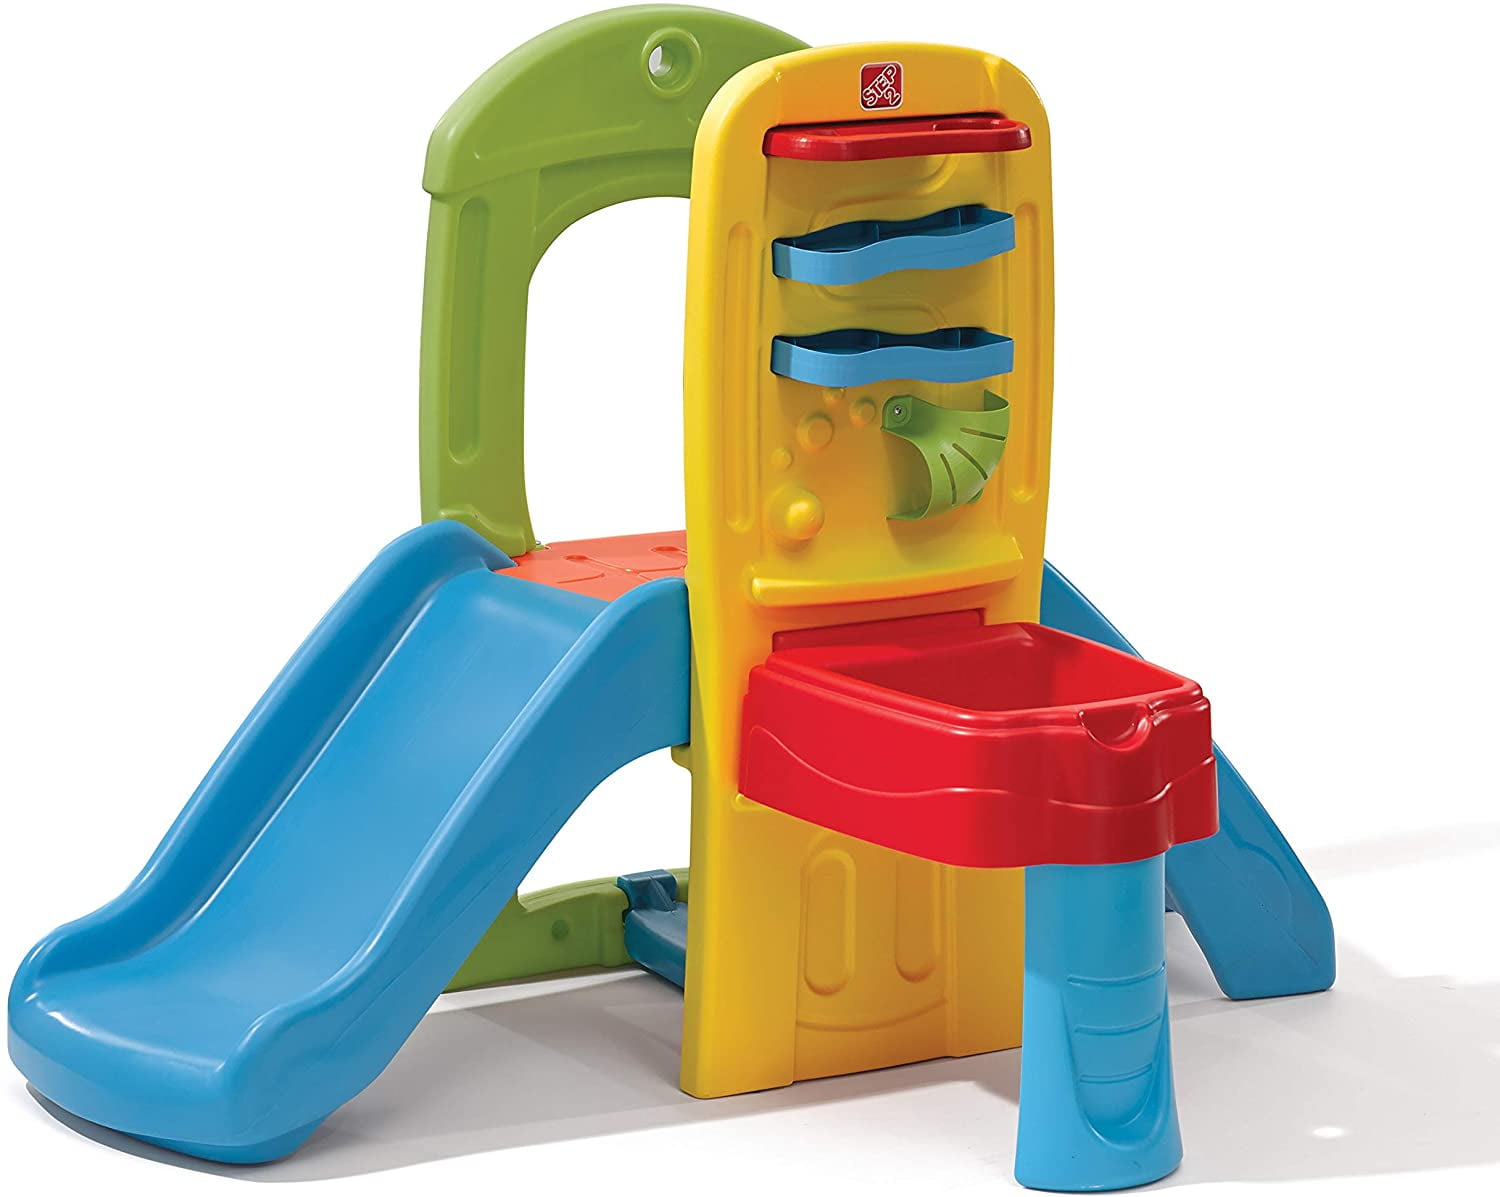 Details about   Portable Kids Playground Slide In/Outdoor Climber Playset Toddler Children Toy 